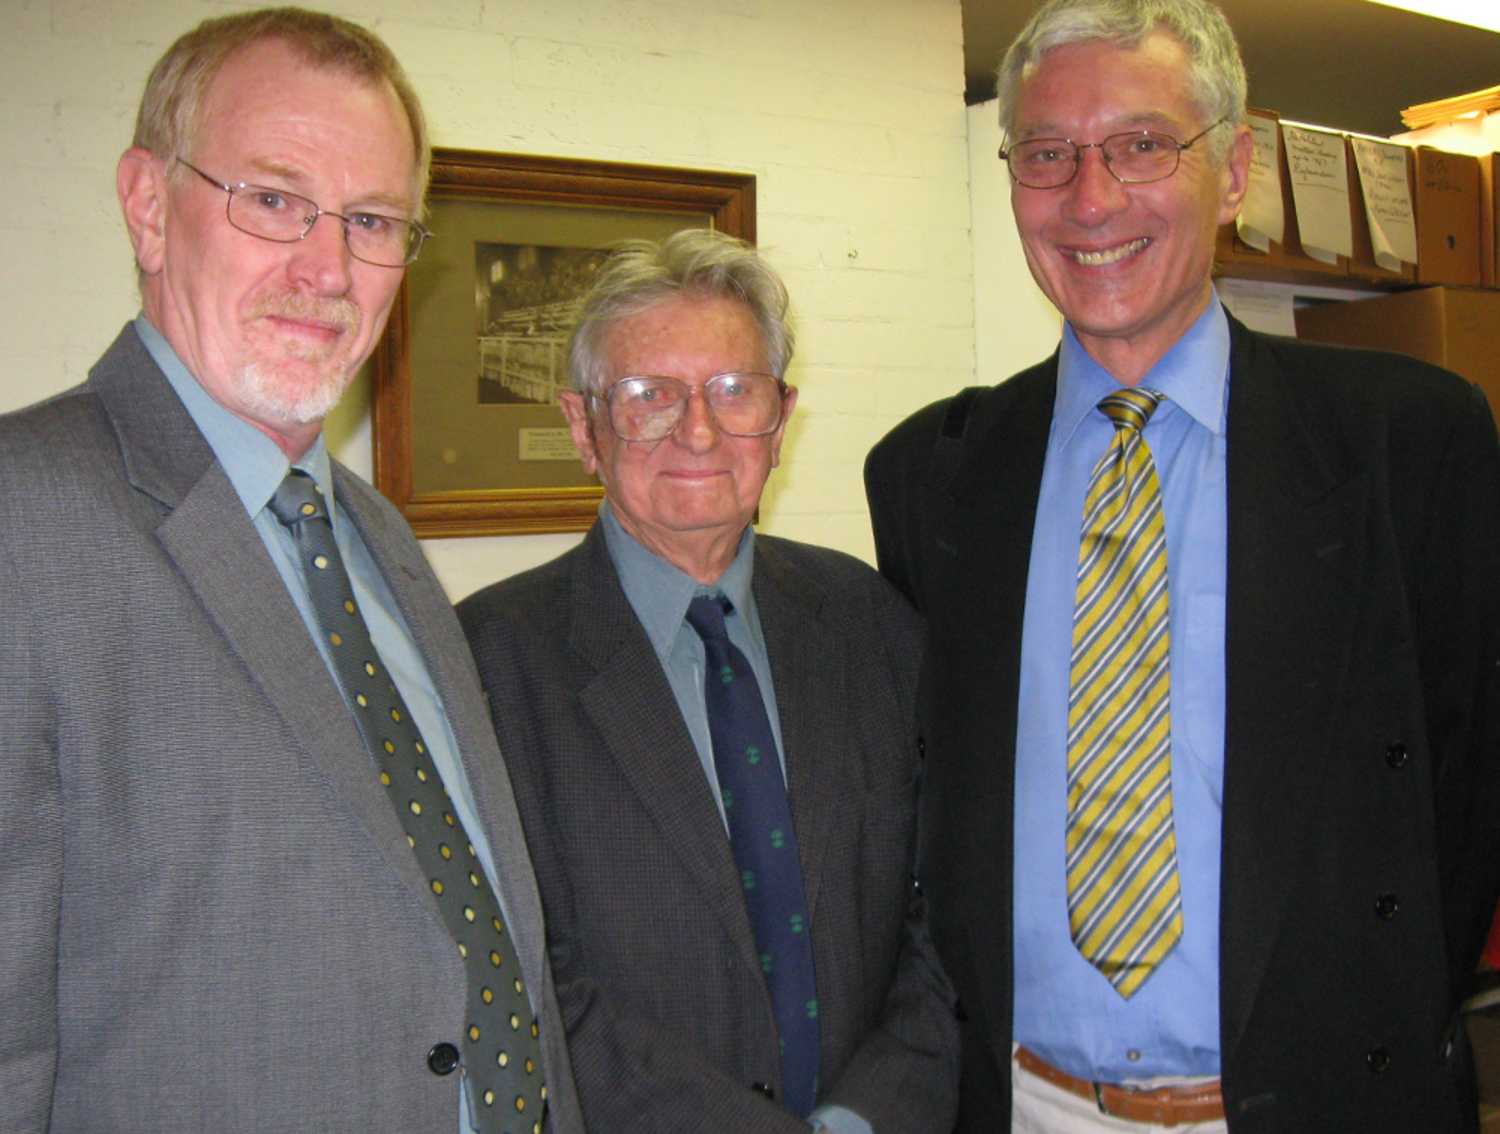 Alan Ventress, Director State Records (Far Left) chats with Lionel Gilbert former Archives Authority member (Center) and Jack Bedson, Acting University Librarian UNE (Far Right), during a visit to the University of New England and Regional Archives in 2008